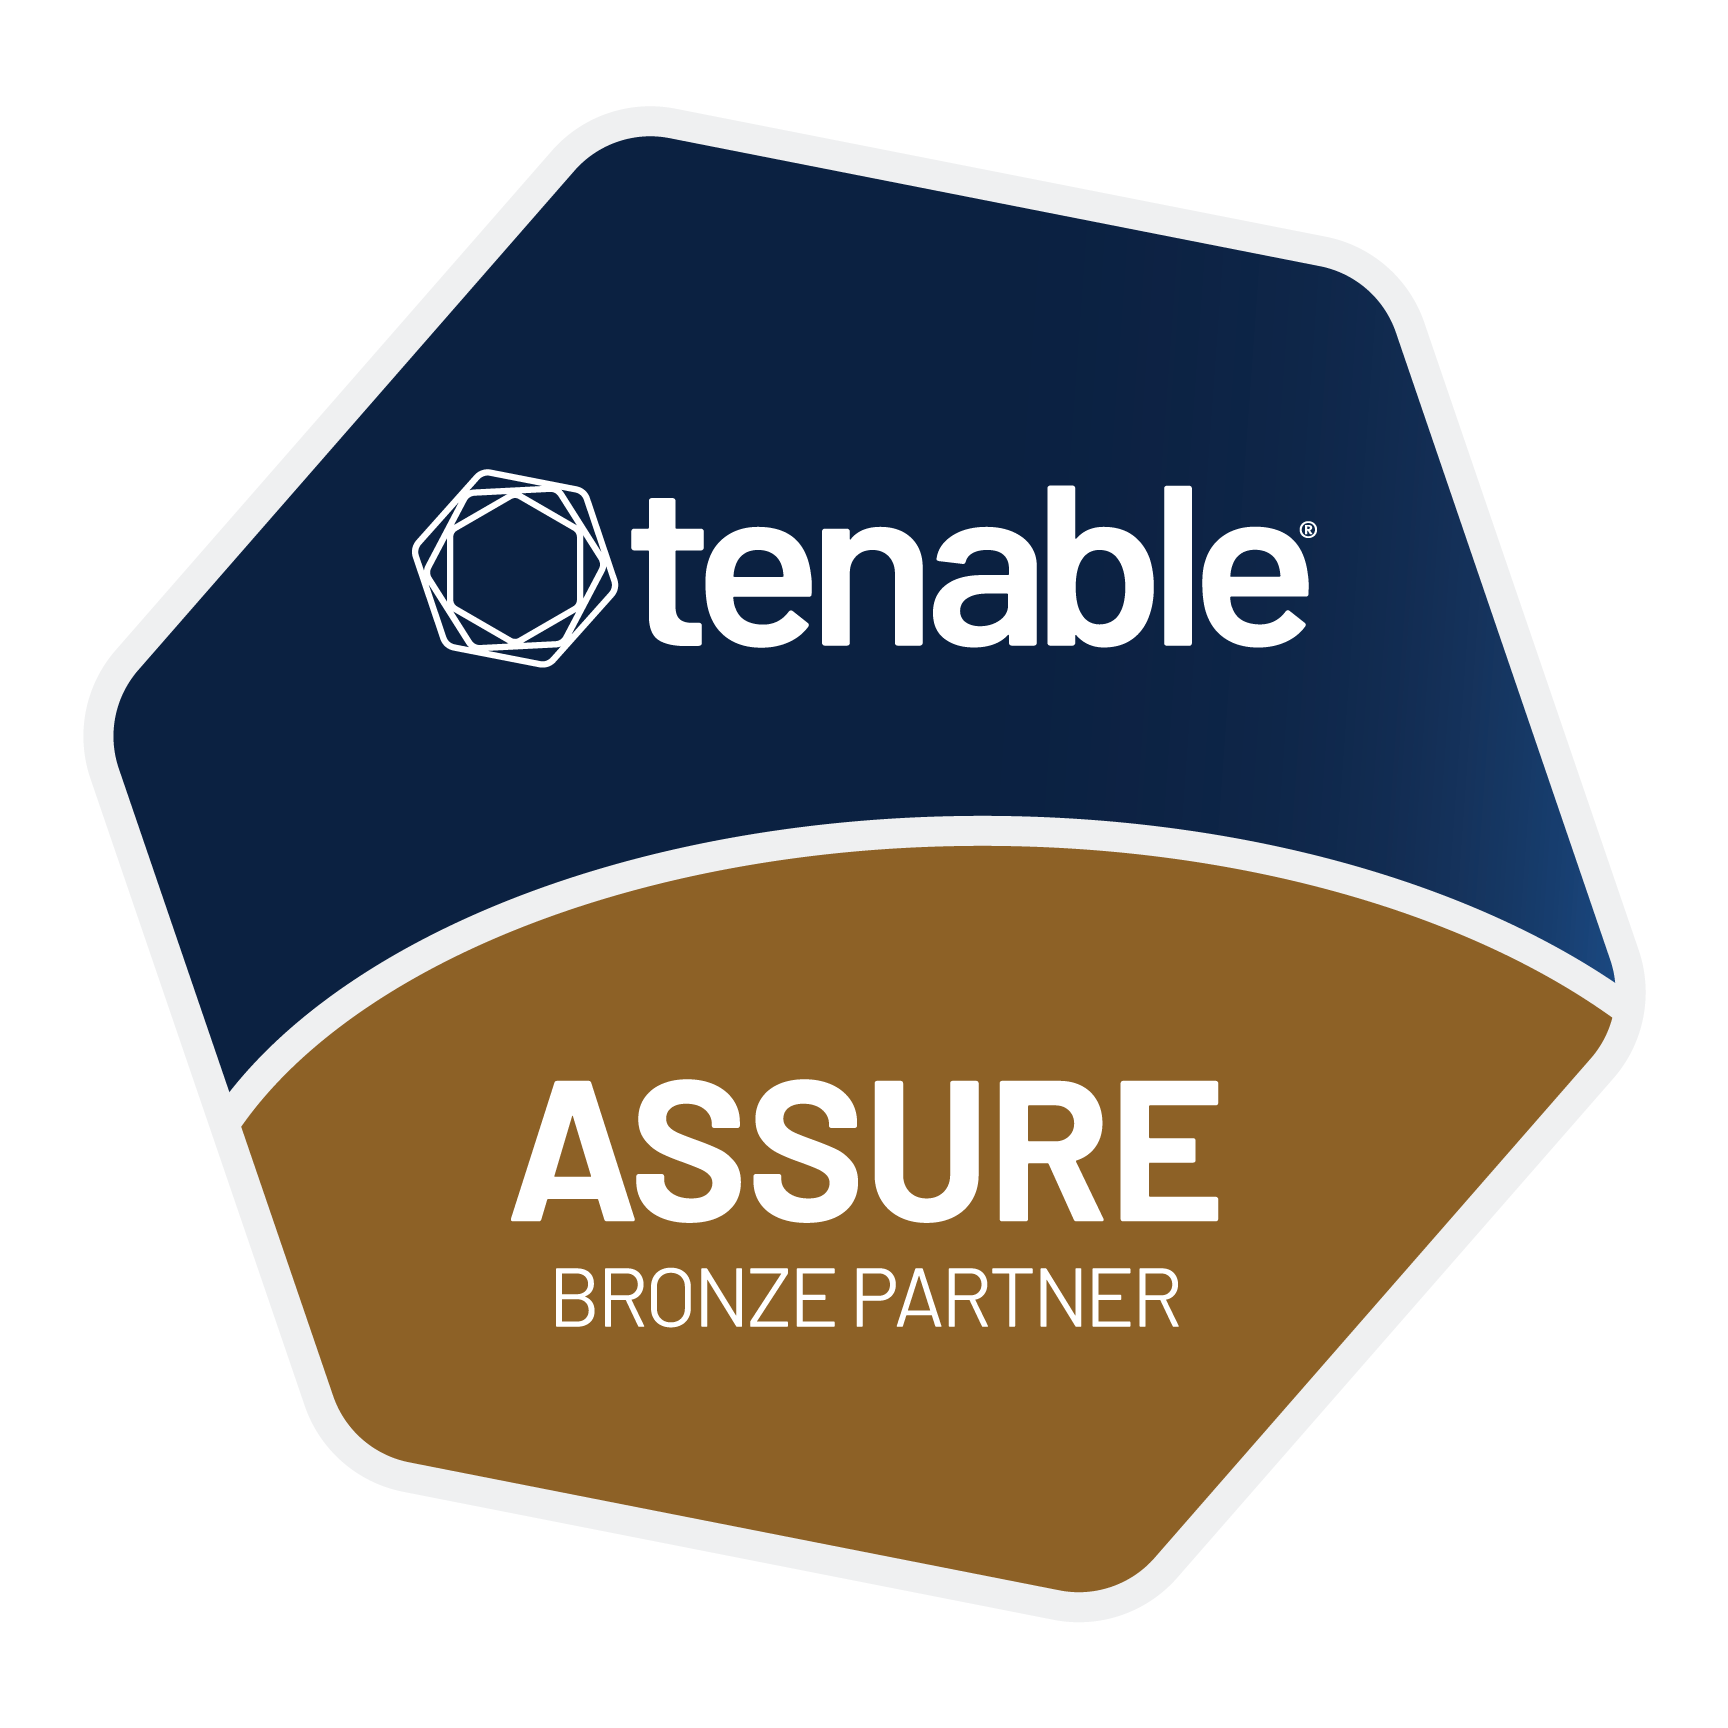 Logo that marks Cantium as a Bronze partner for Tenable